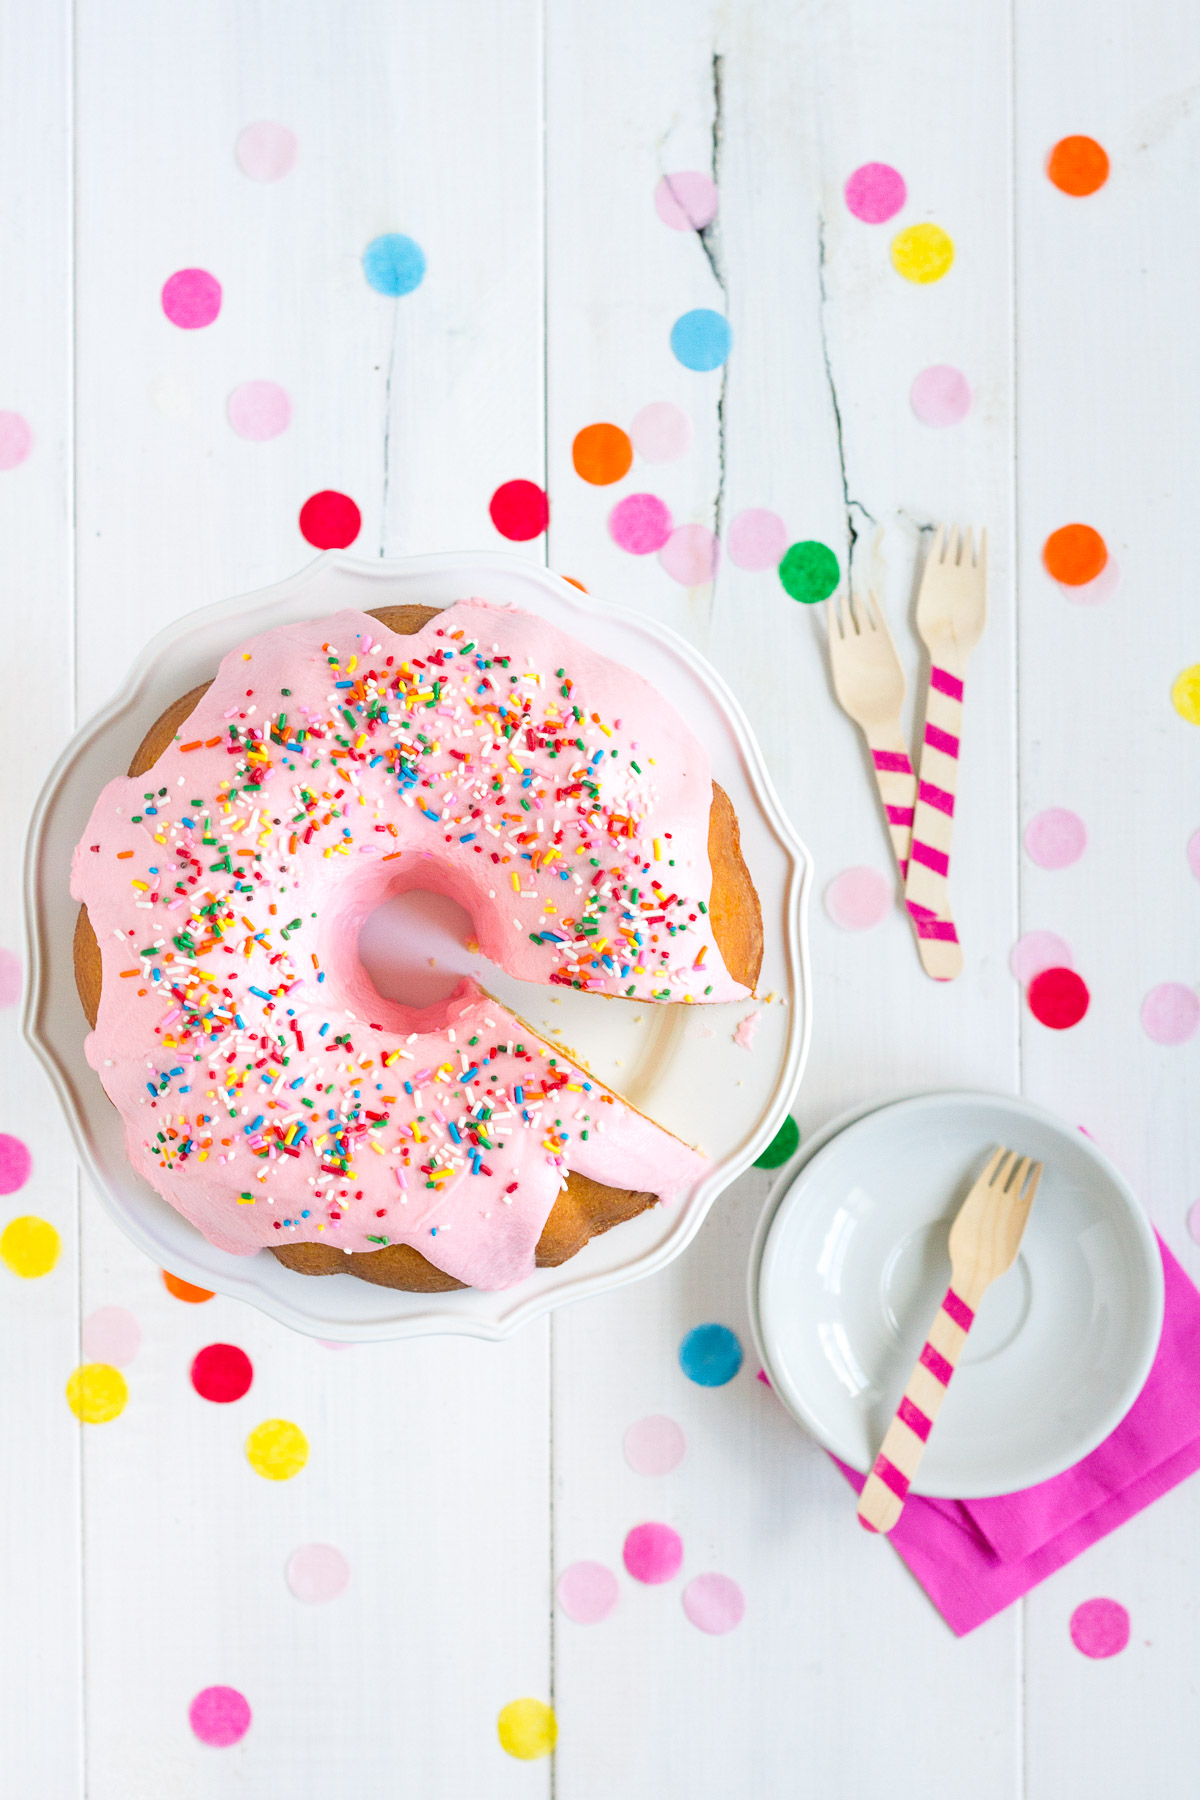 Celebrate National Donut Day with this pink donut bundt cake!